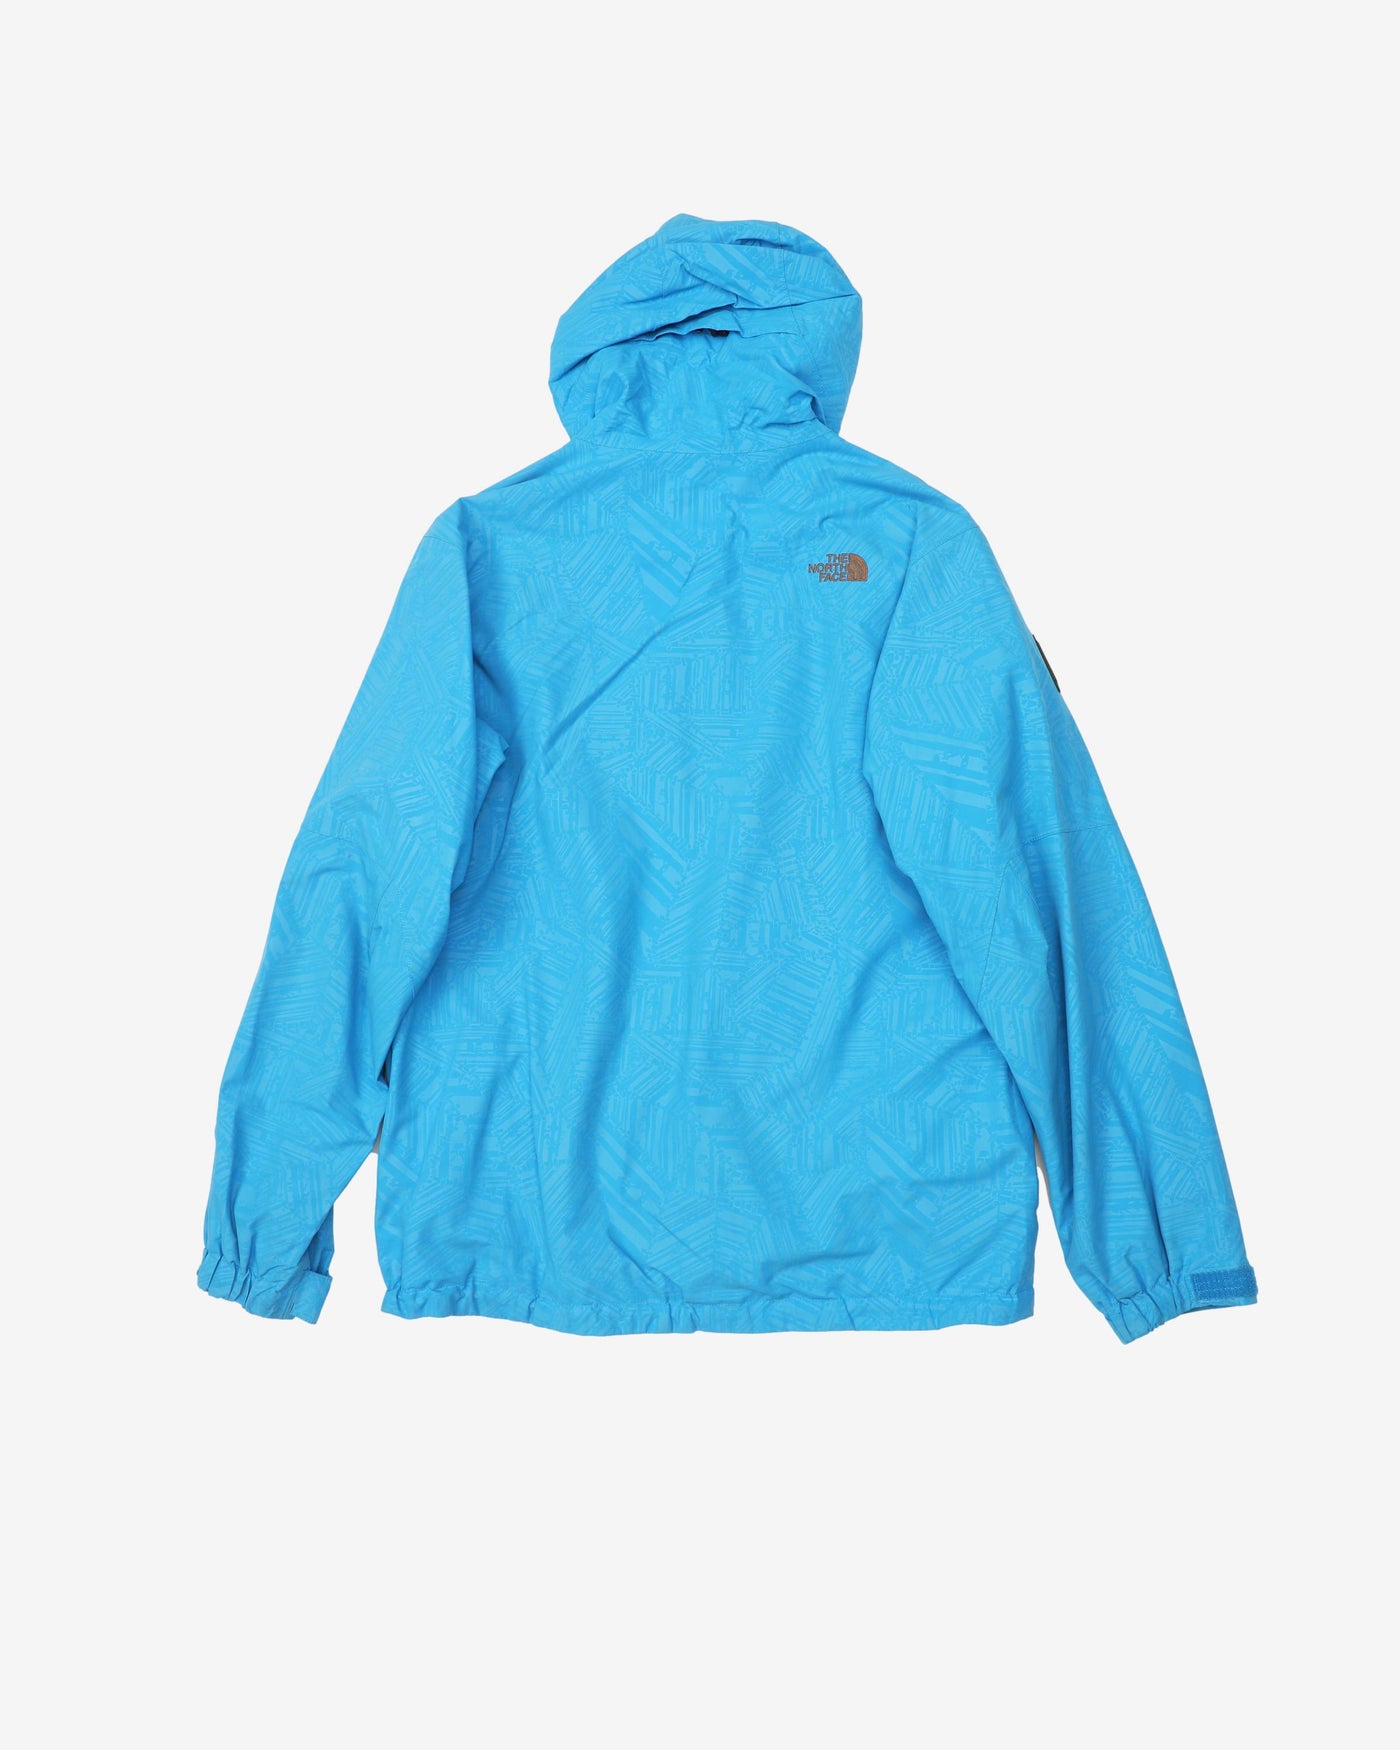 The North Face Blue Patterned Stitching Design Hooded Rain Jacket - M